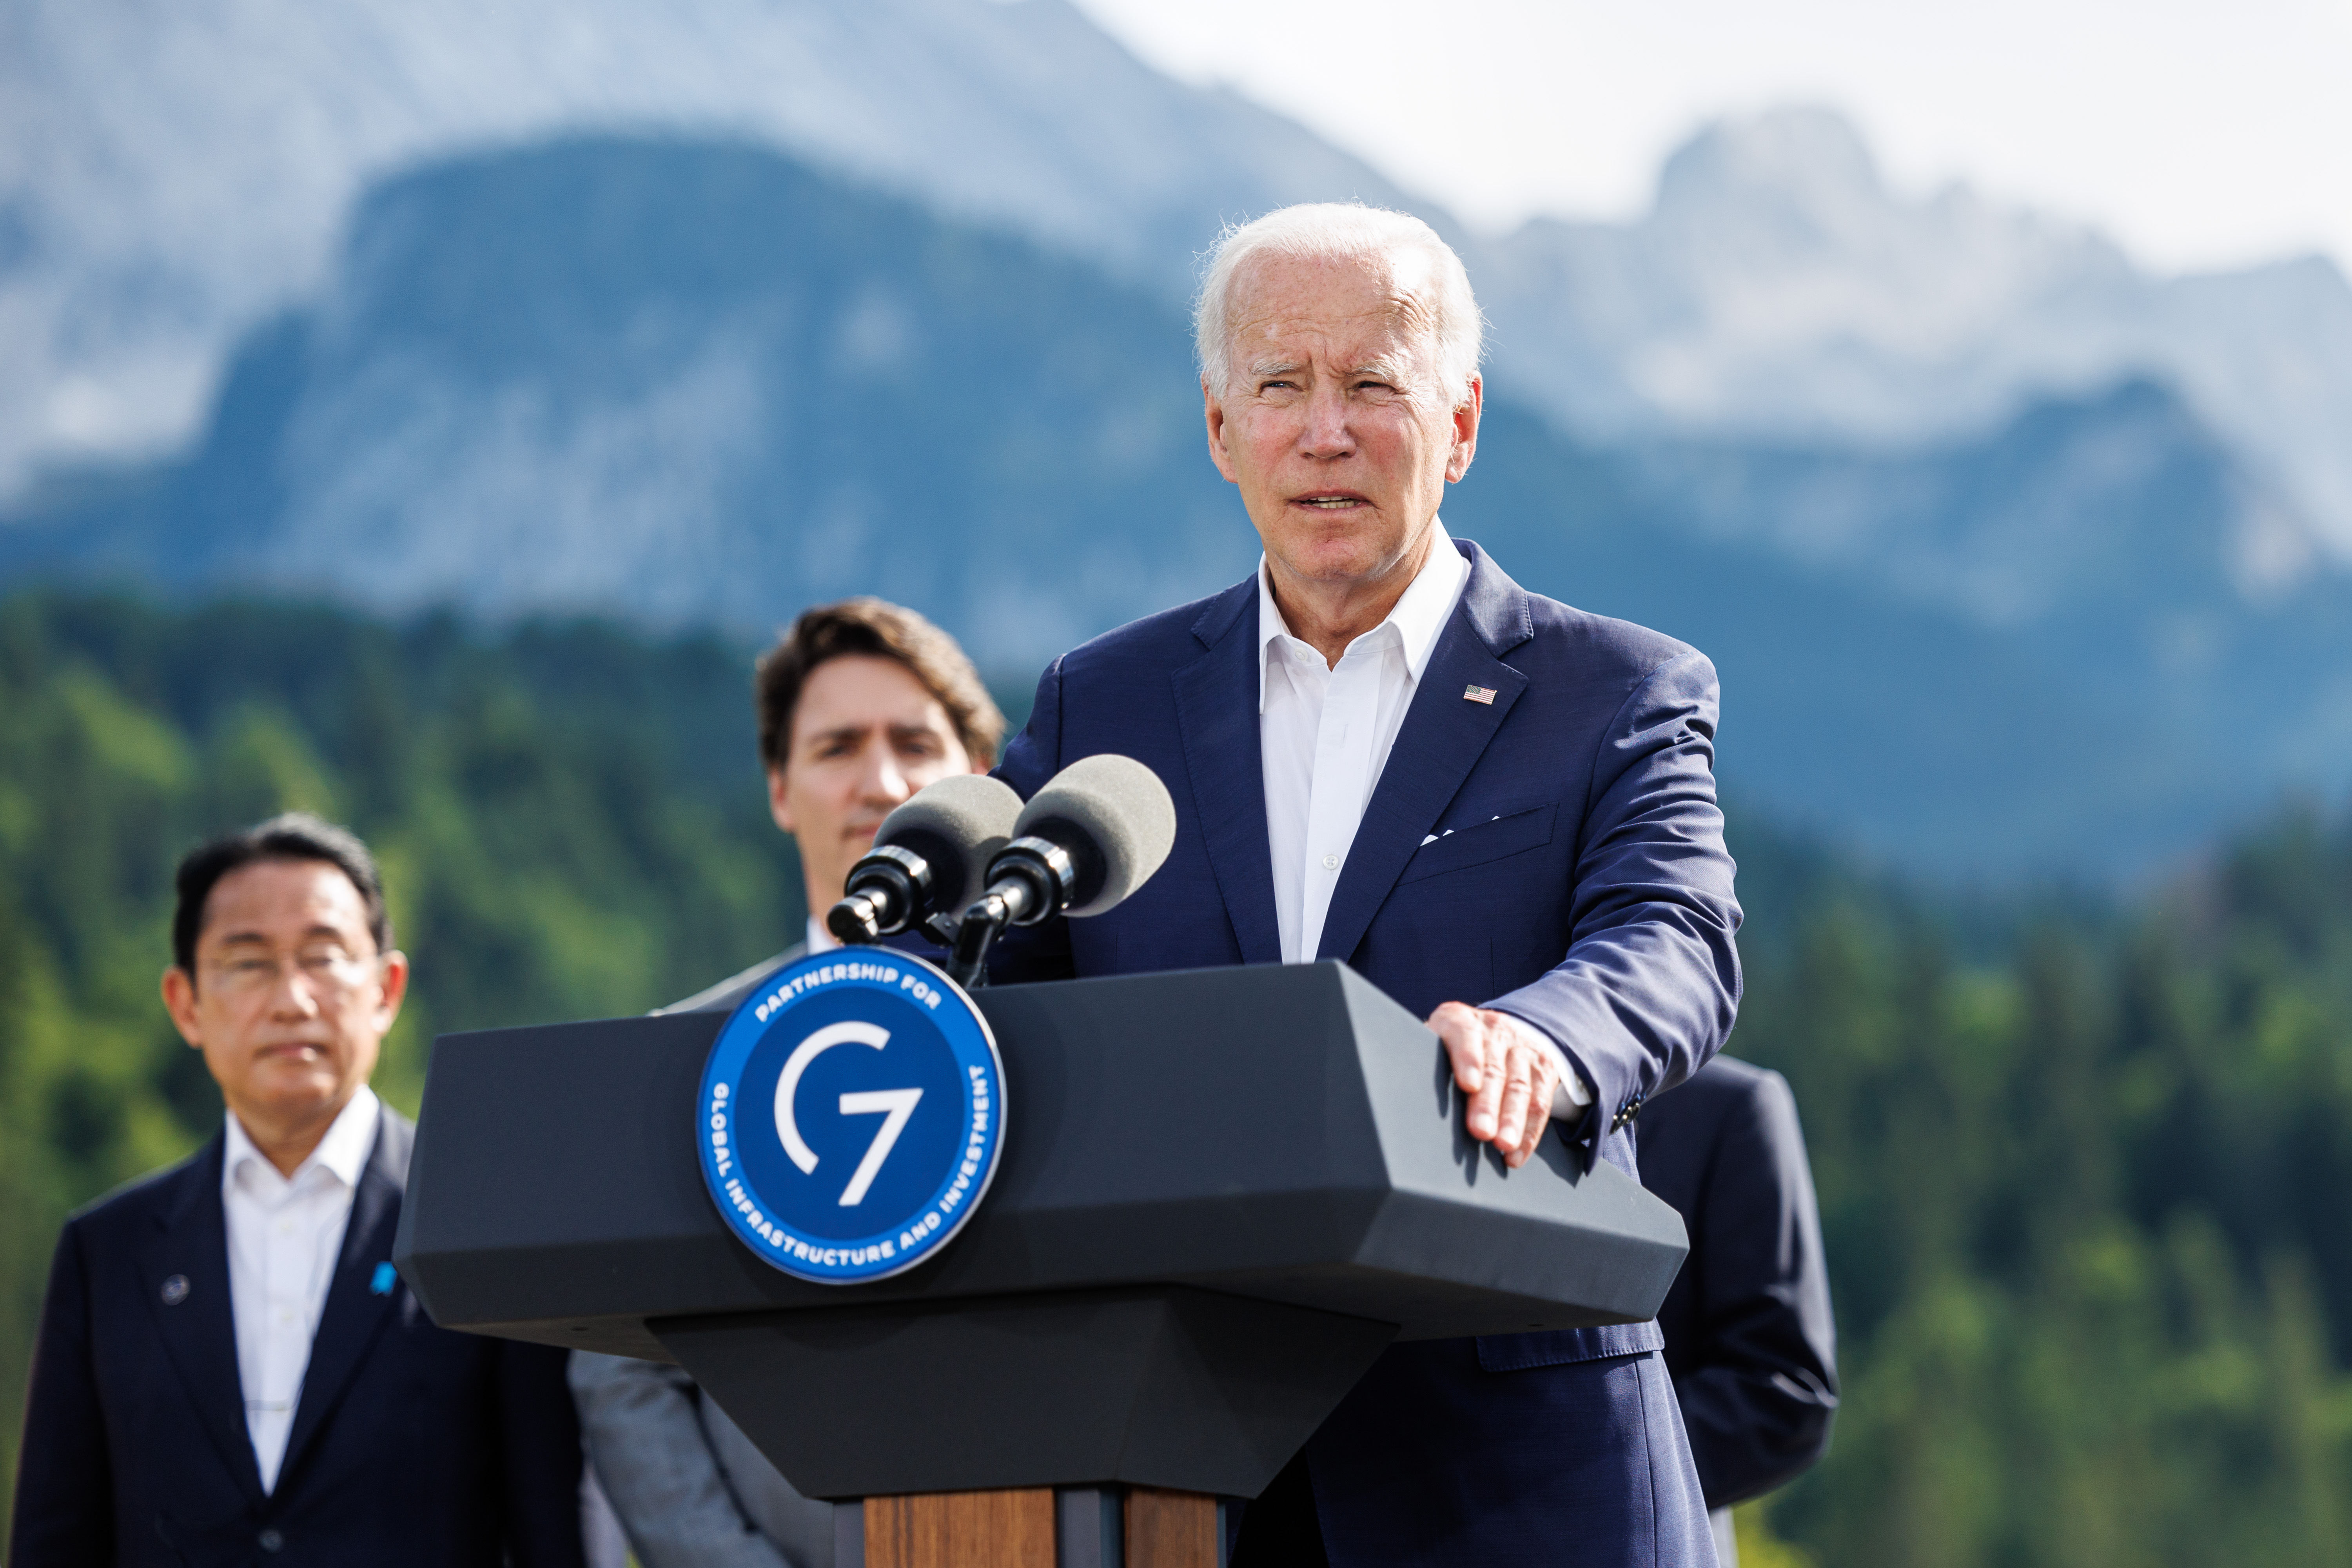 US President Joe Biden gives a statement to the press on partnership for global infrastructure and investment.